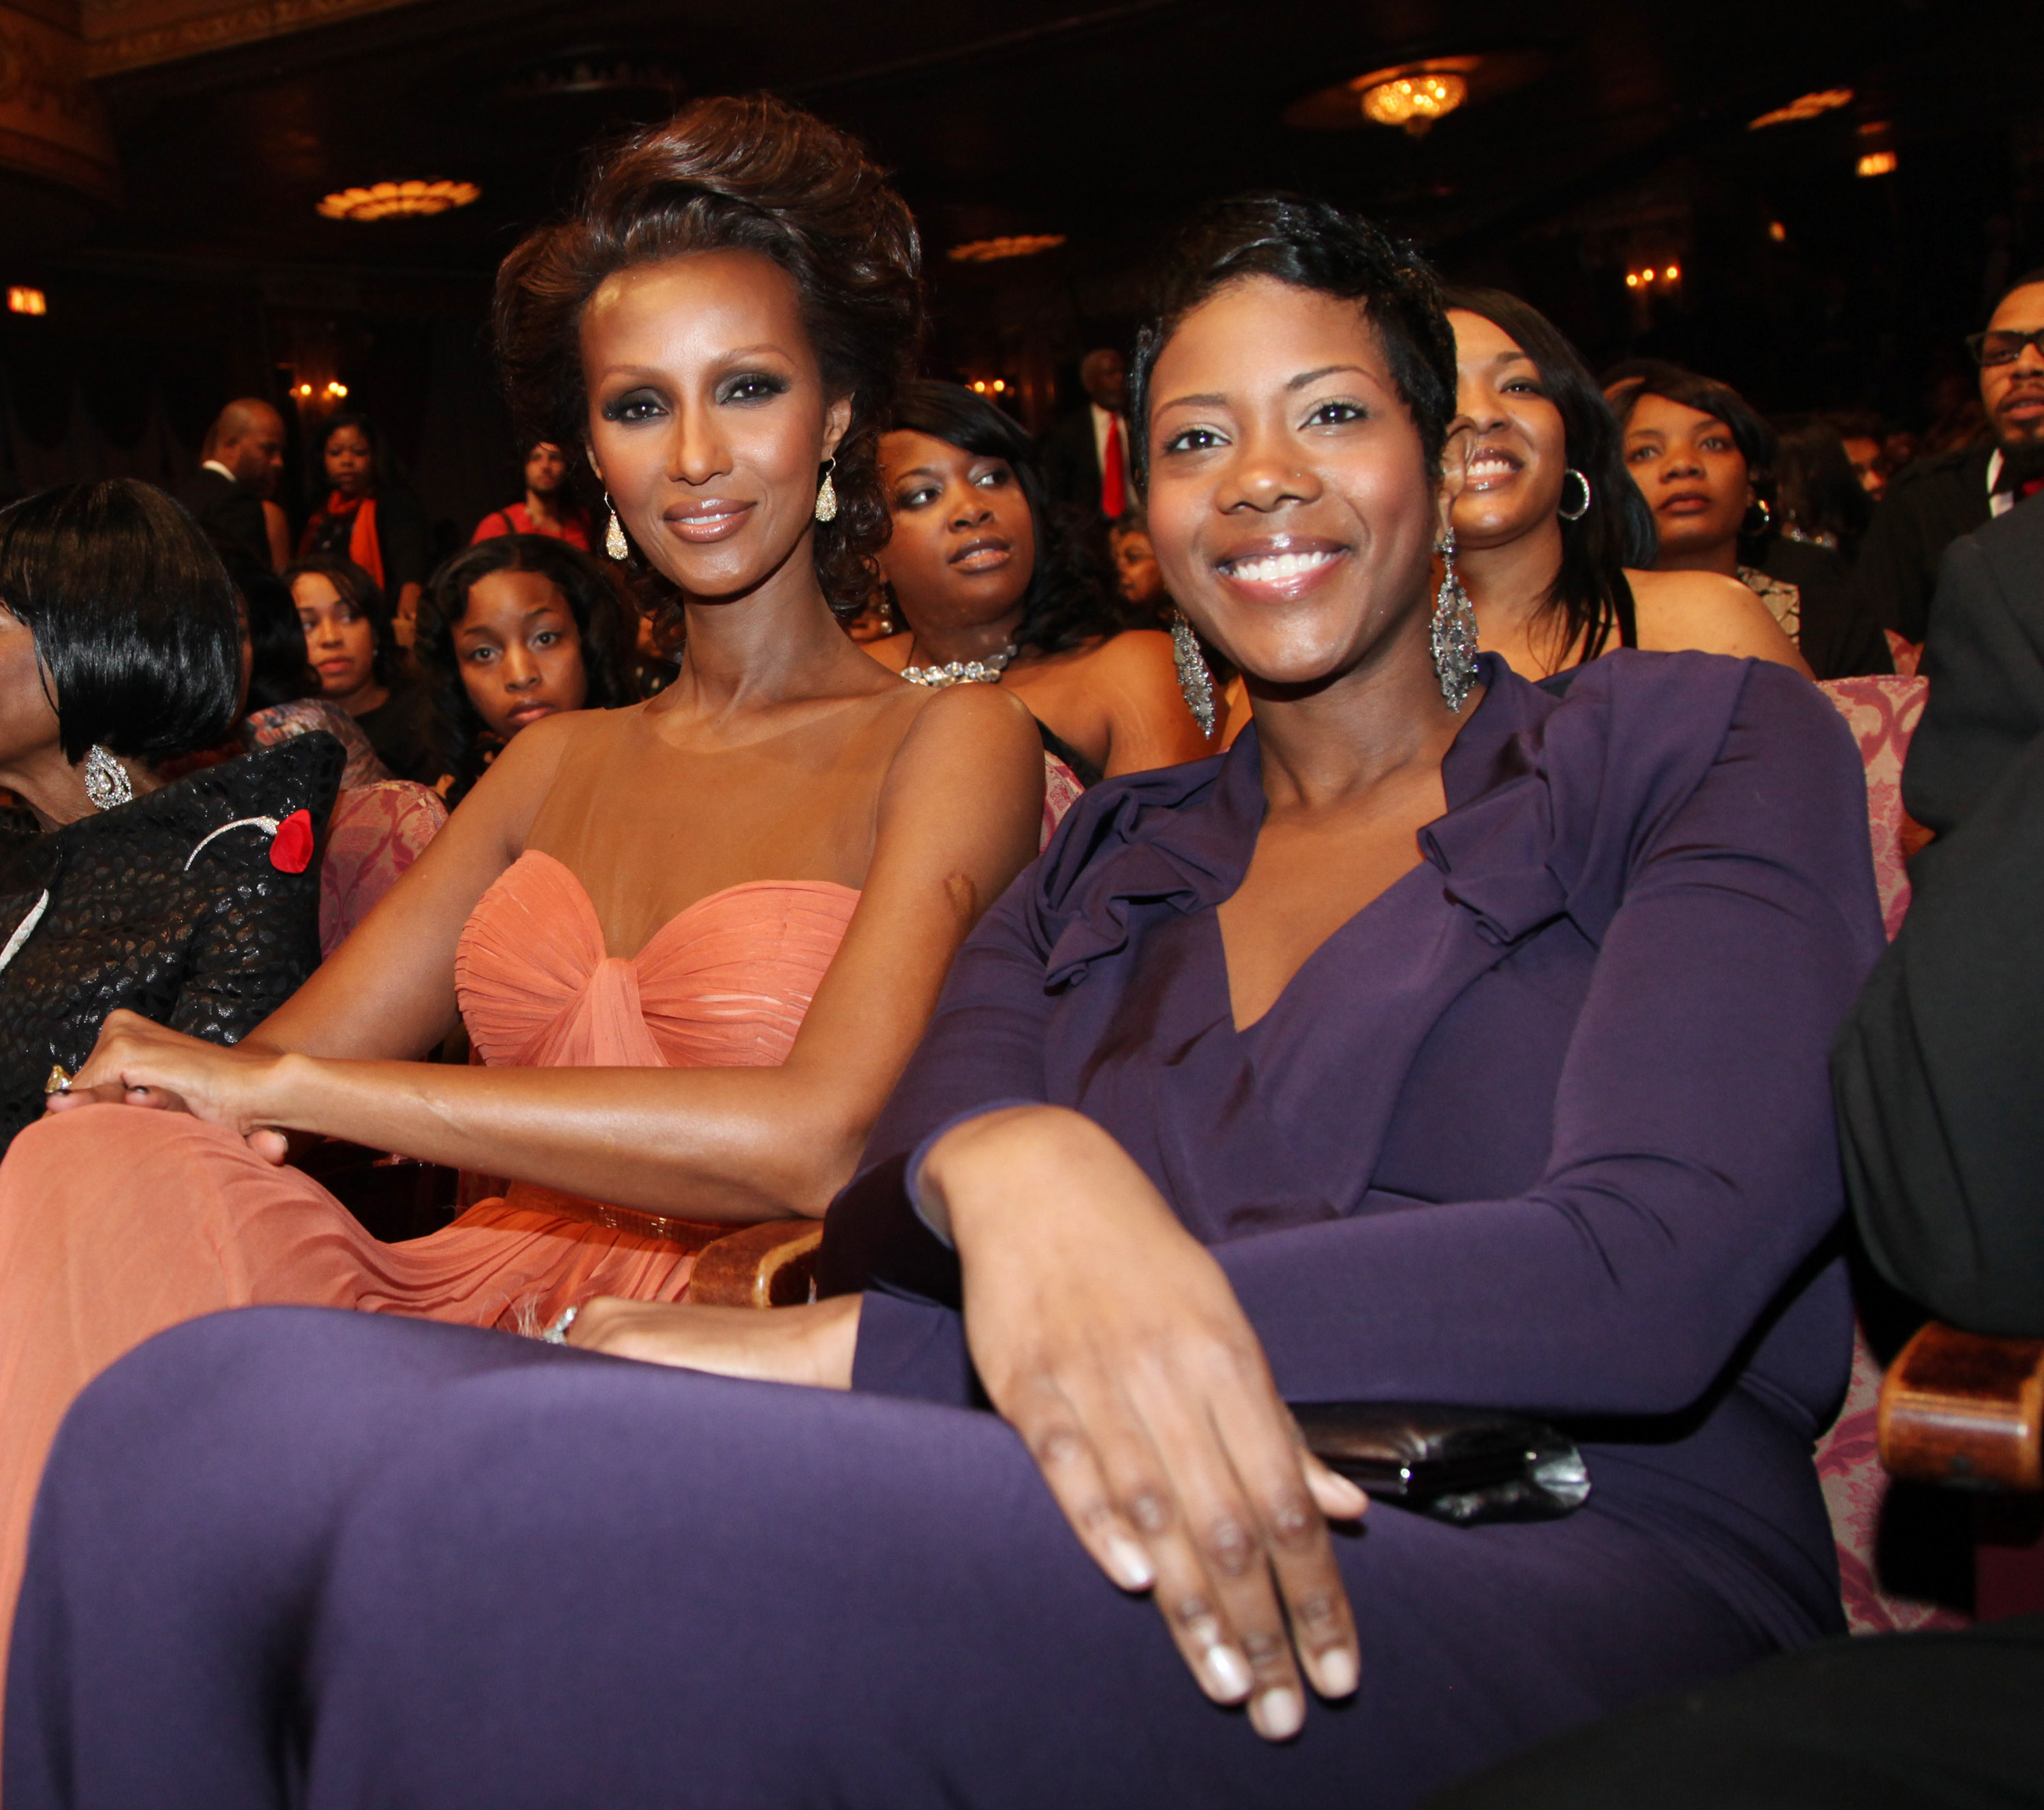 Iman and her daughter Zulekha Haywood attend the 4th annual BET Honors at the Warner Theatre on January 15, 2011, in Washington, DC | Source: Getty Images